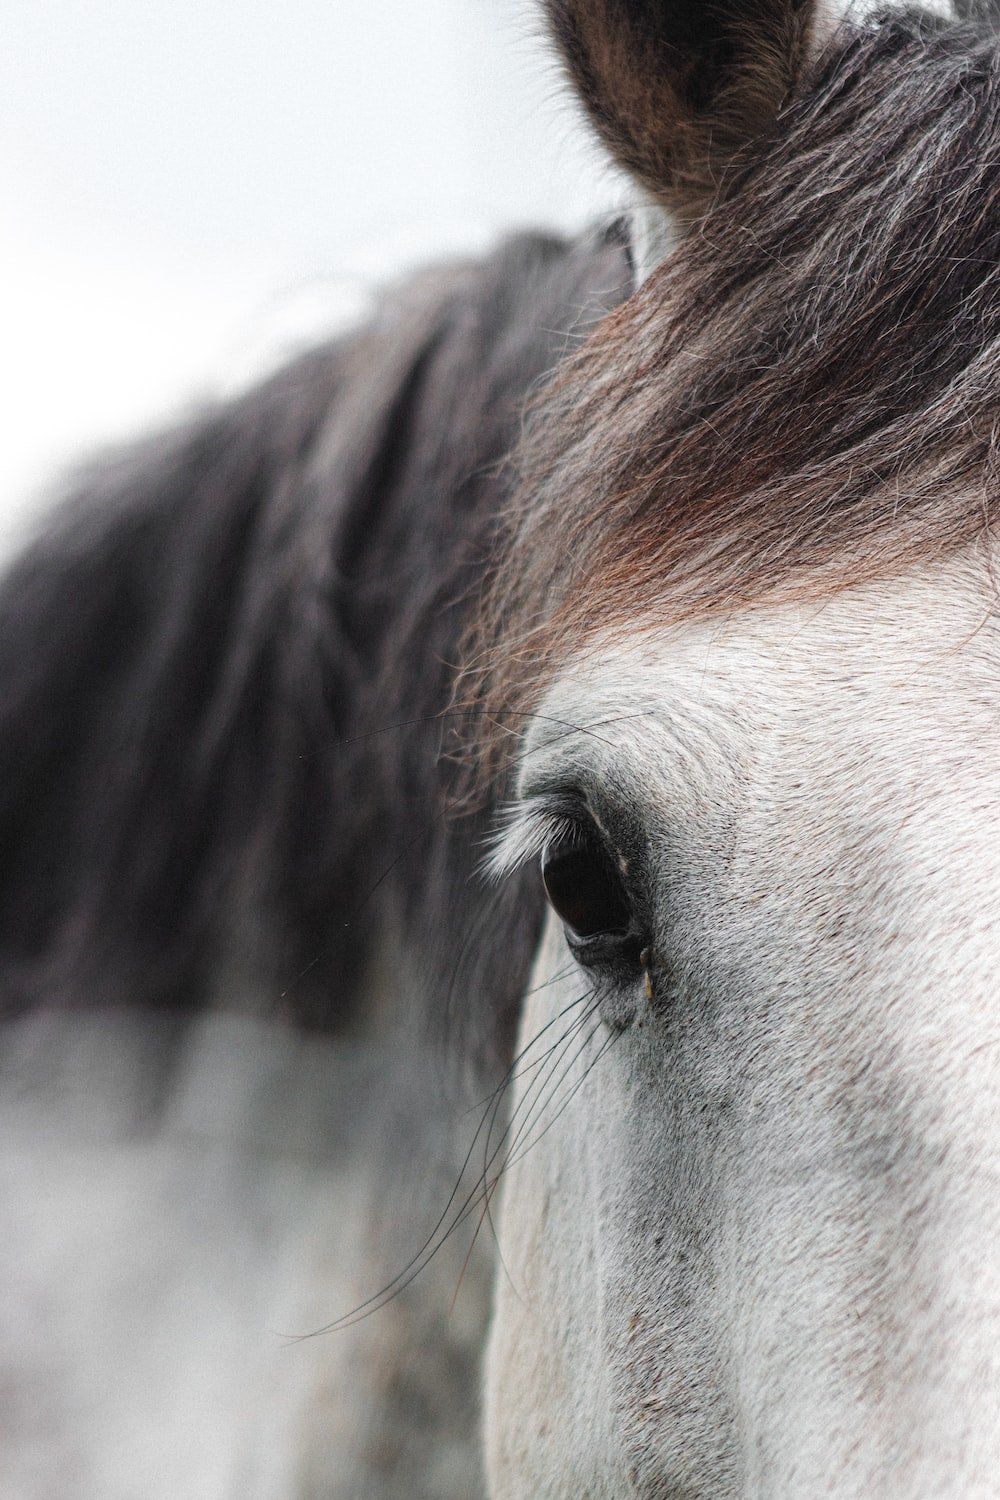 Horse Face Picture. Download Free Image